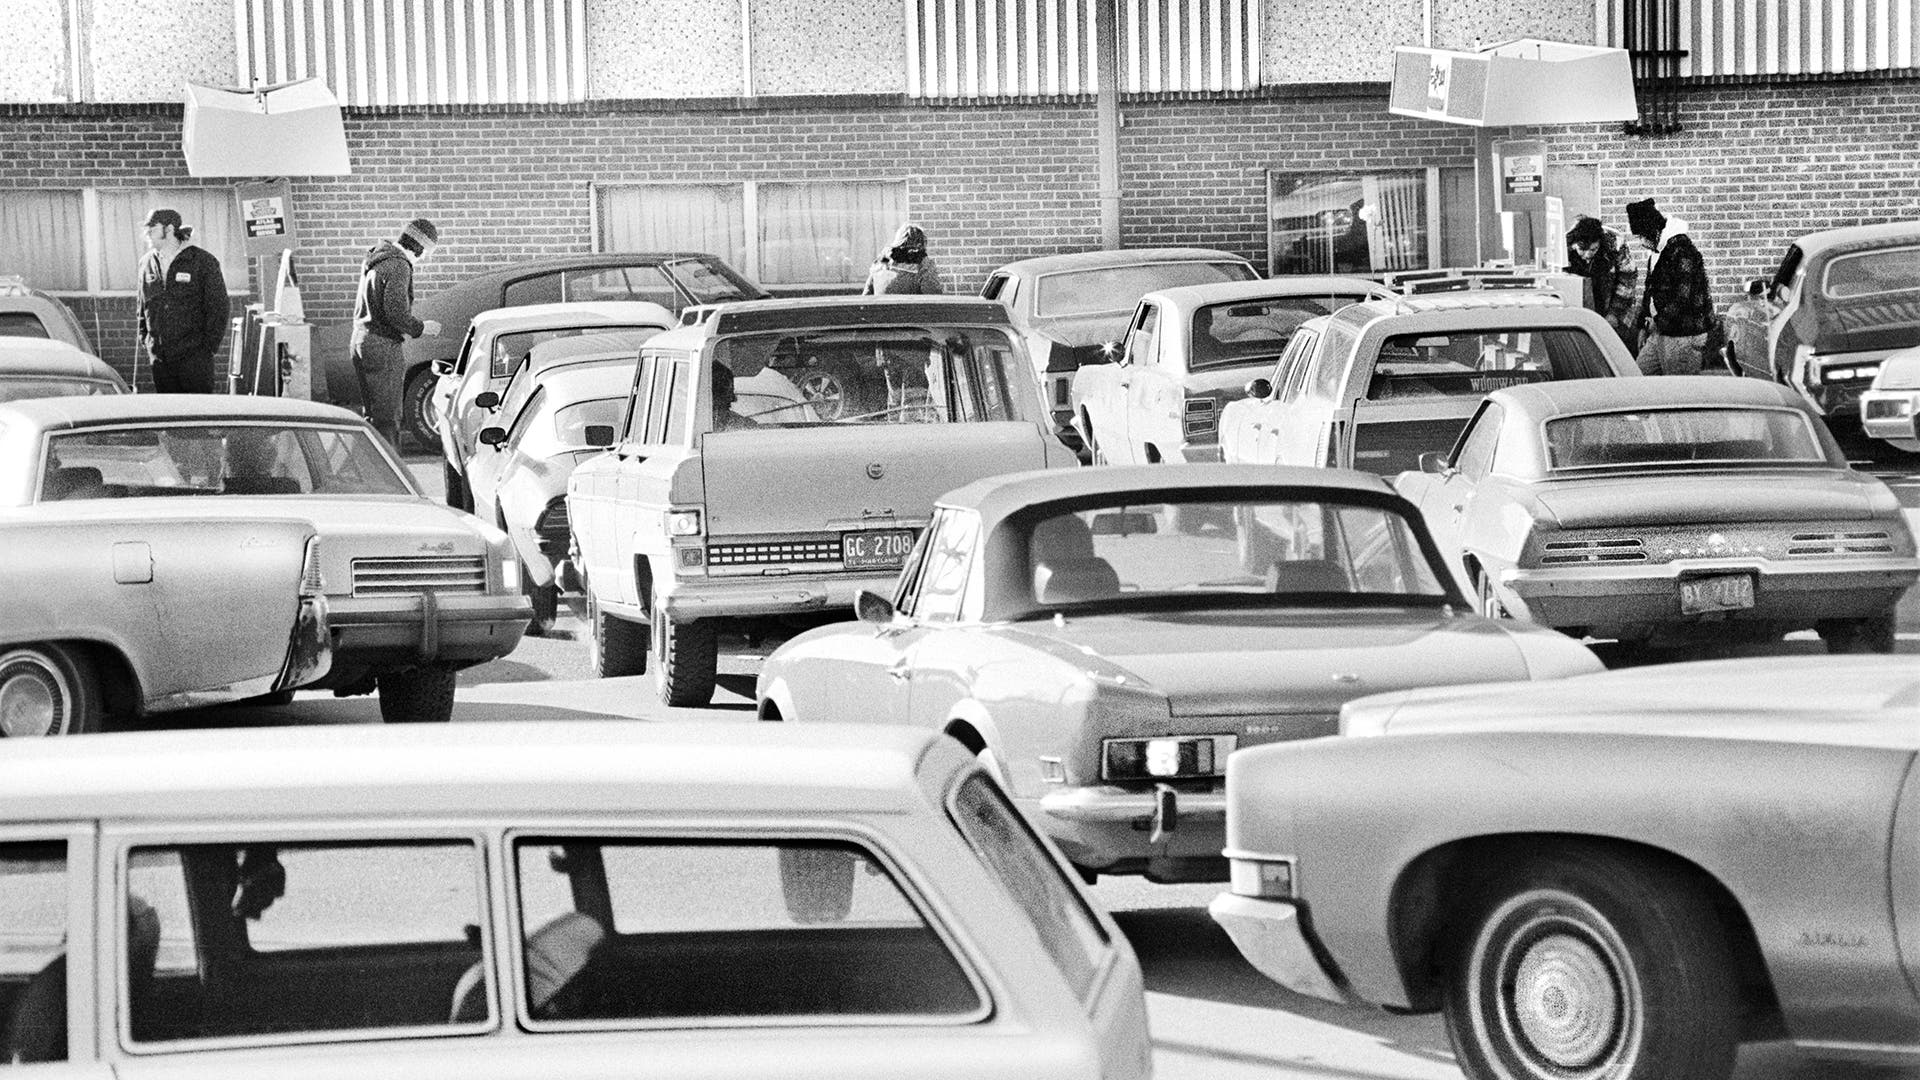 Cars lined up at a gas station in Maryland in February 1974.